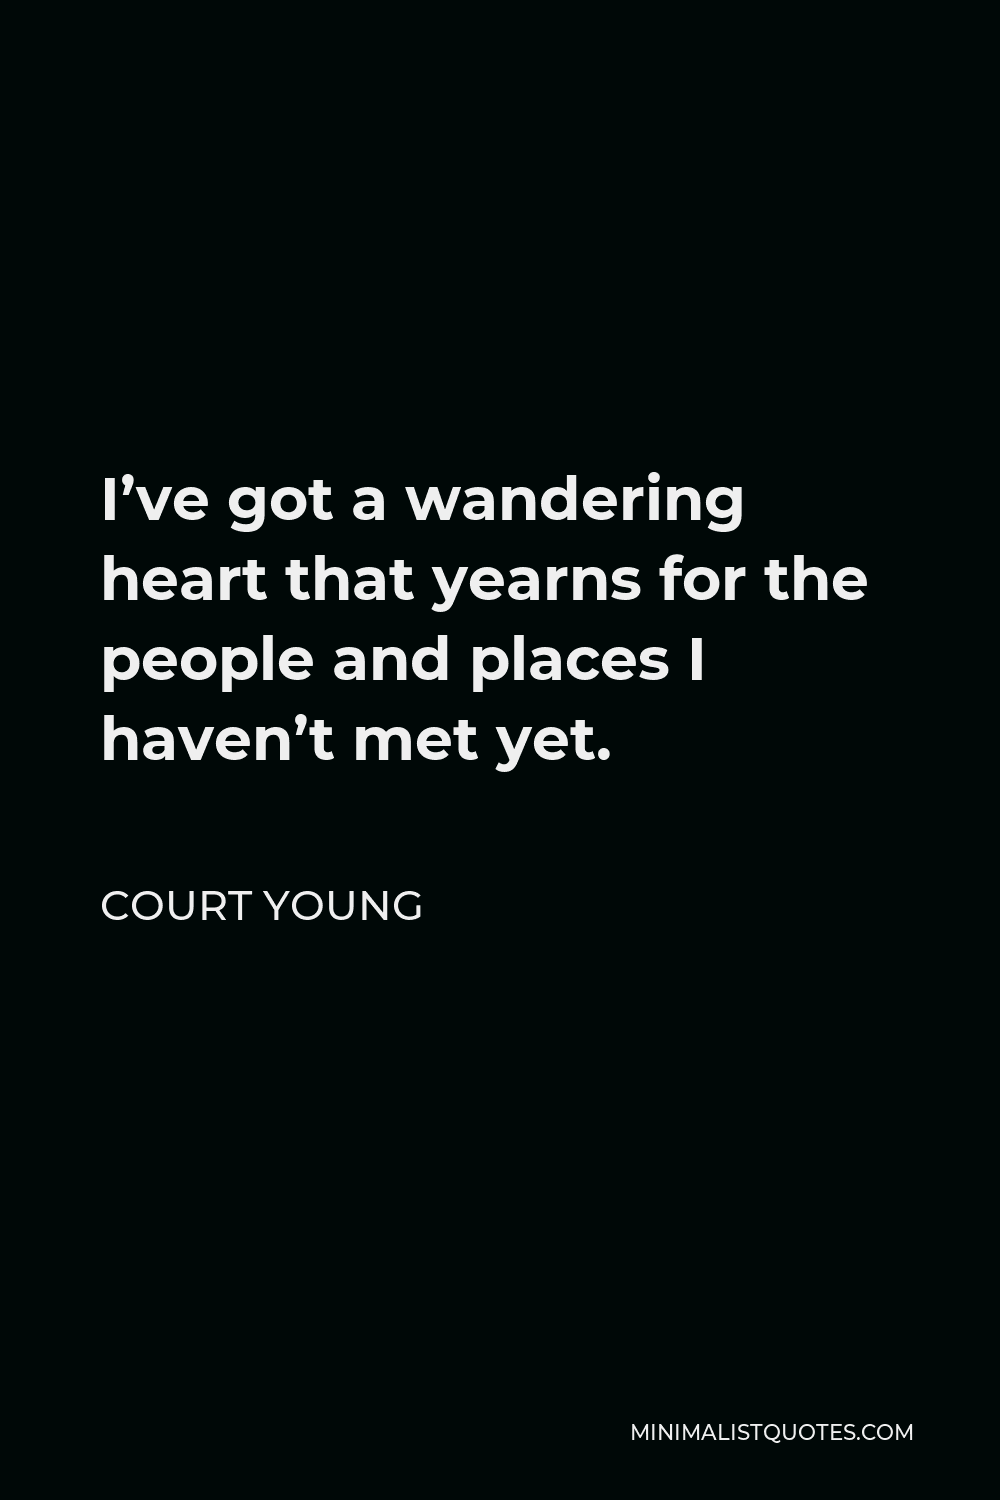 Court Young Quote - I’ve got a wandering heart that yearns for the people and places I haven’t met yet.